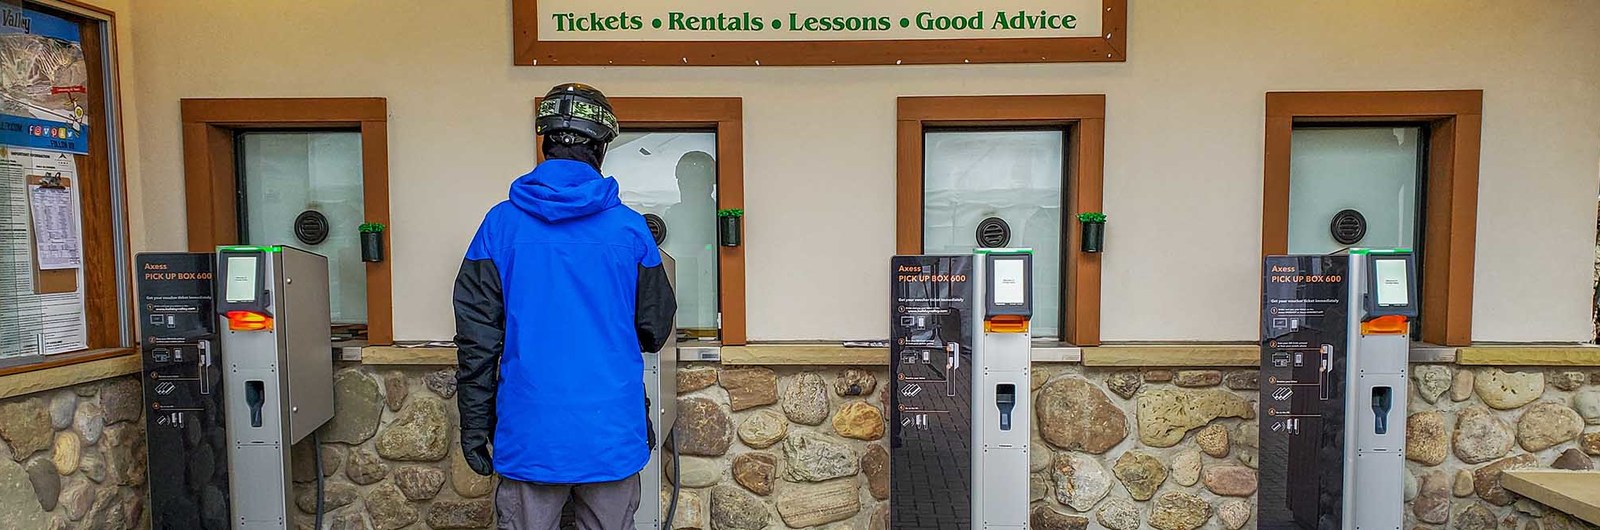 A man standing at a PUB machine getting his lift tickets.